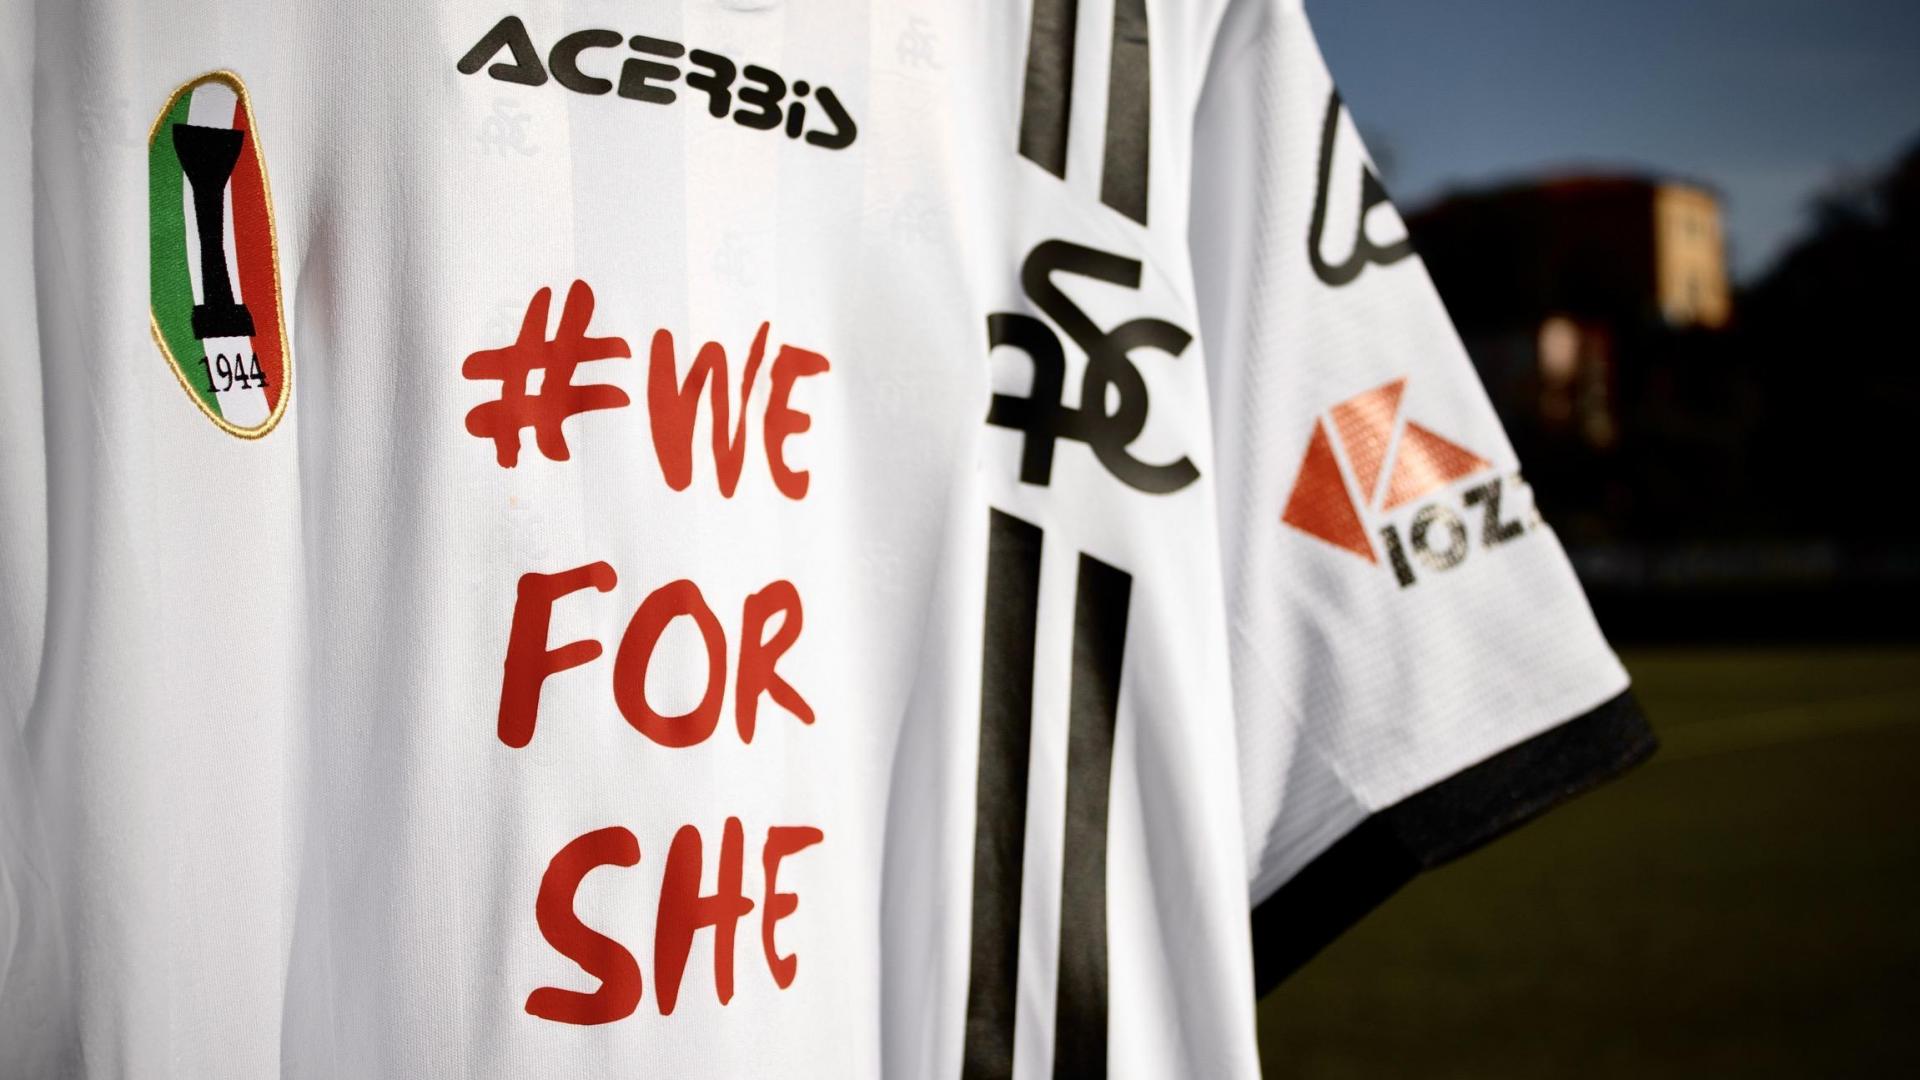 Spezia Calcio joins forces with Differenza Donna to launch #WeForShe initiative